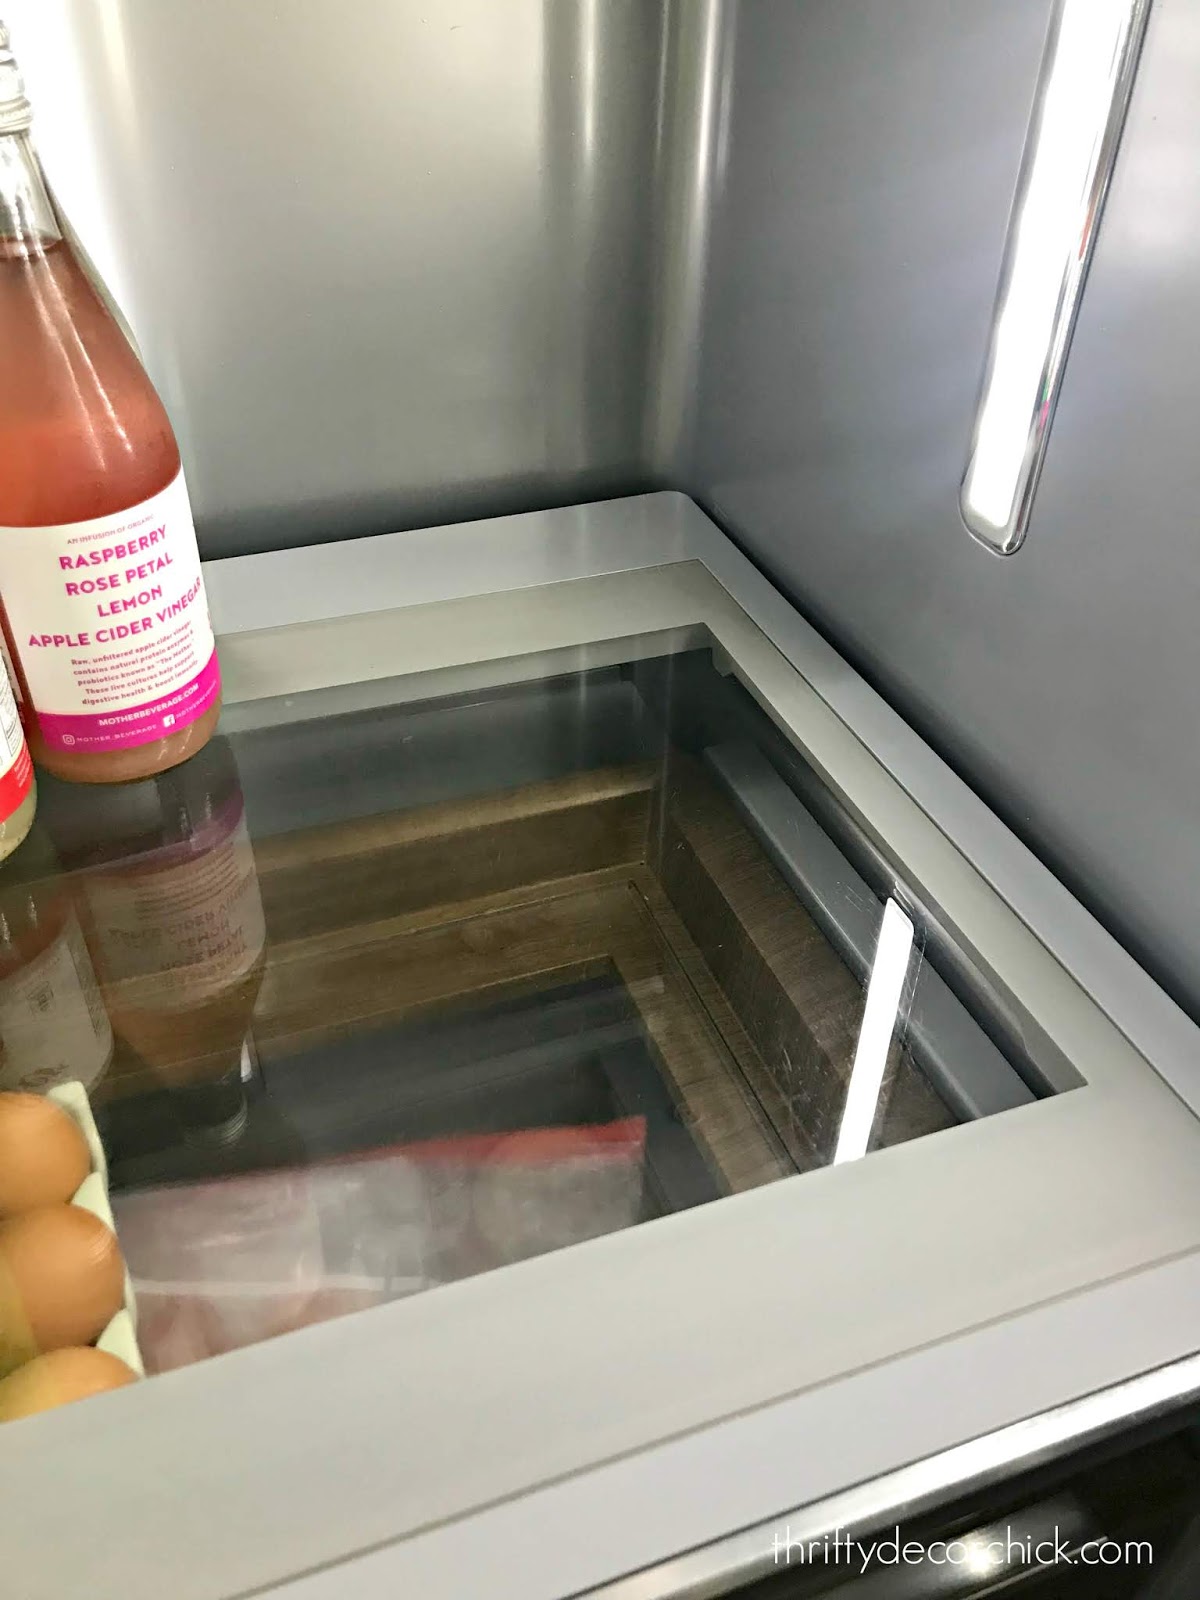 How to get the inside of your refrigerator sparkling clean